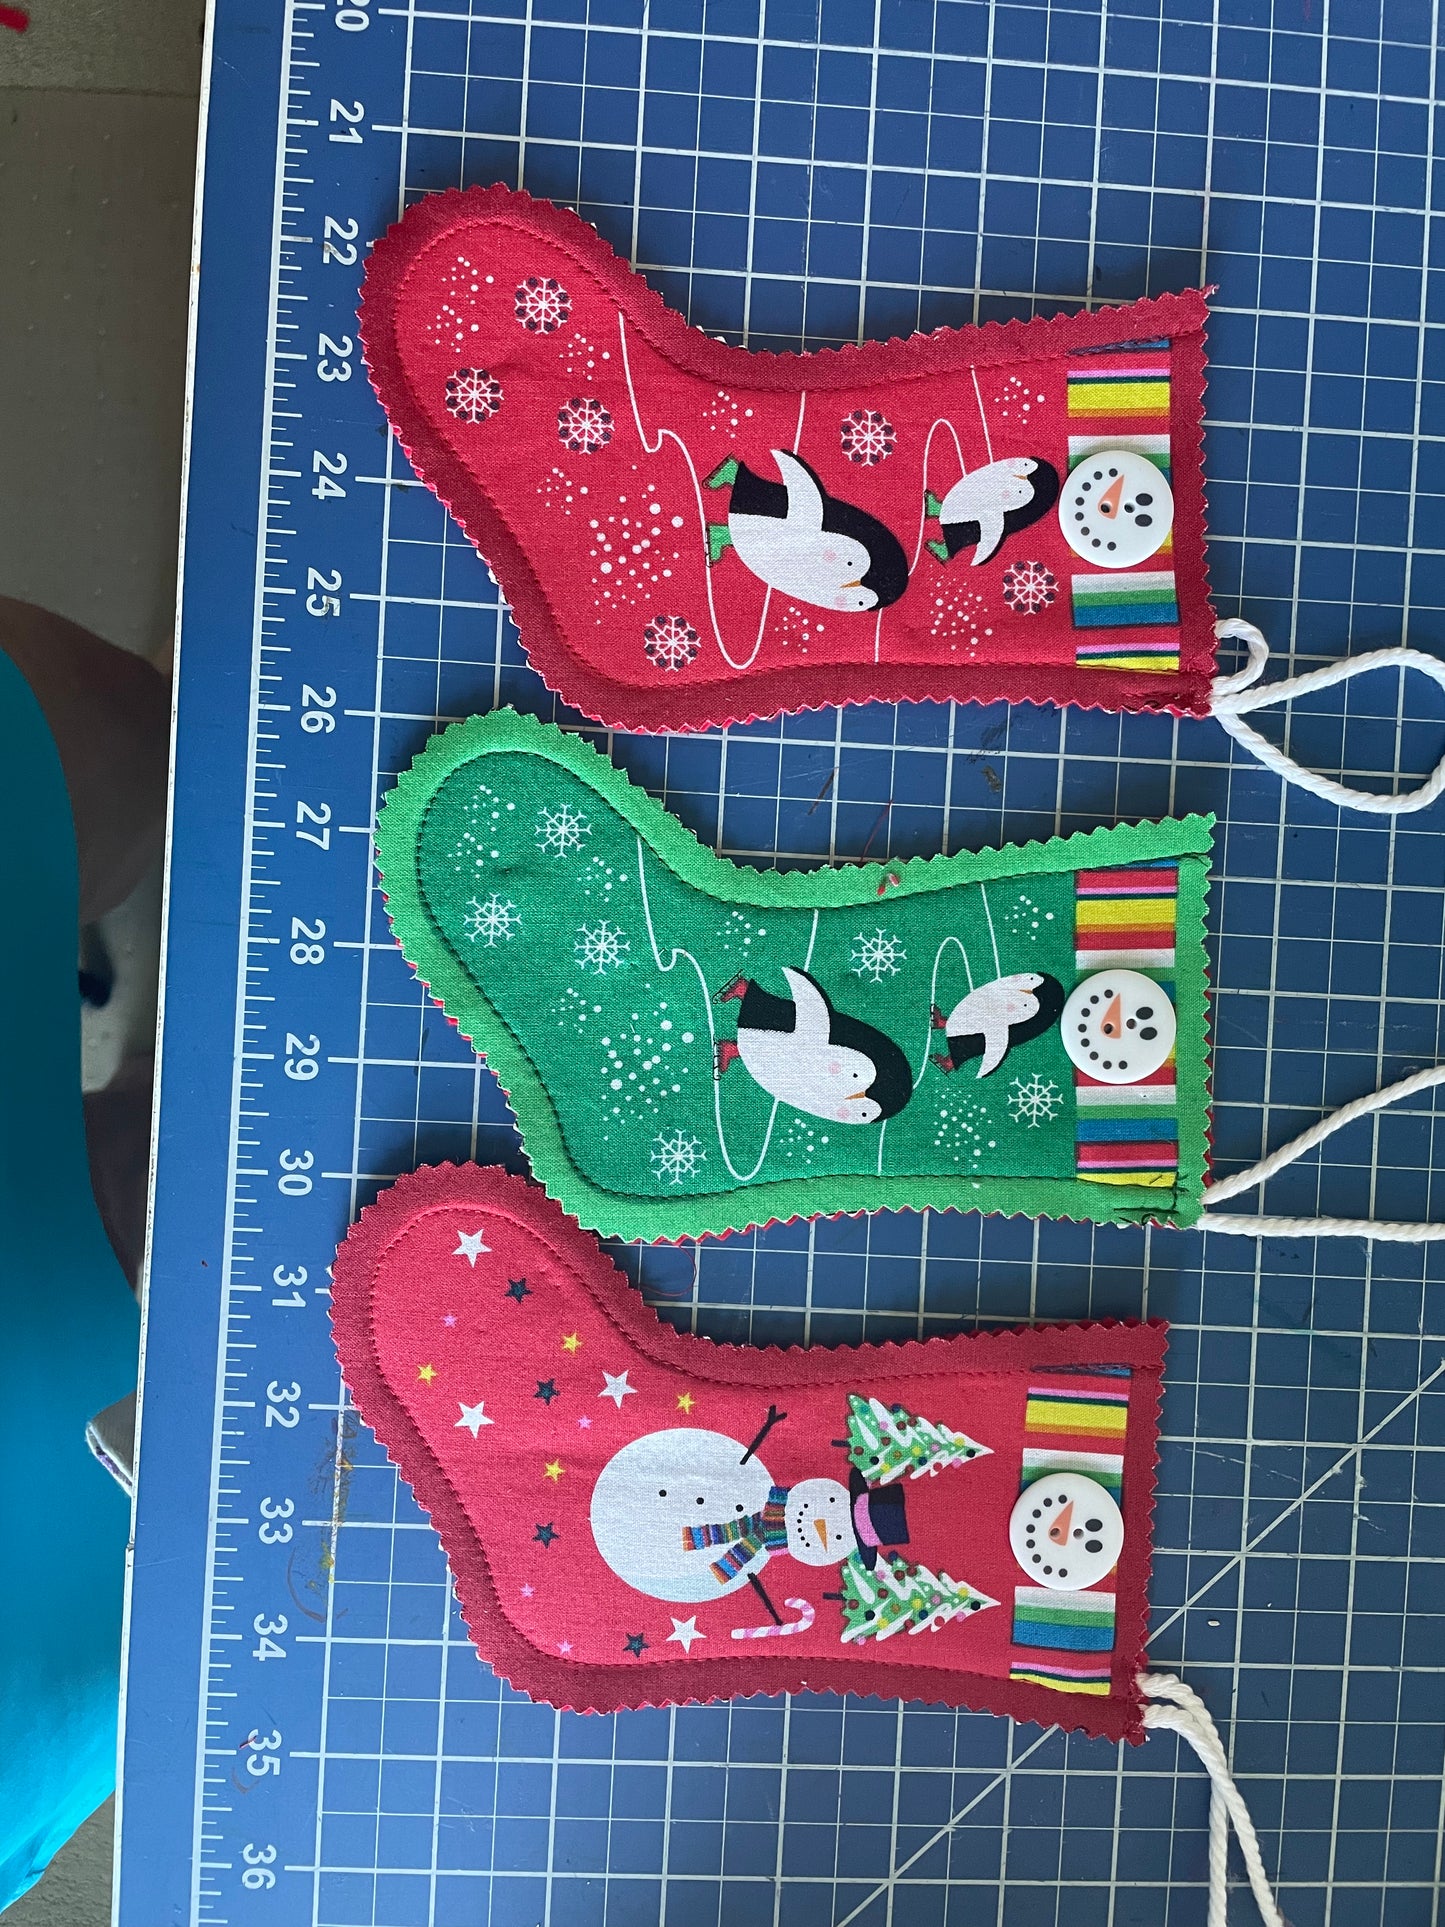 Gift card Stockings Gift Card Holders